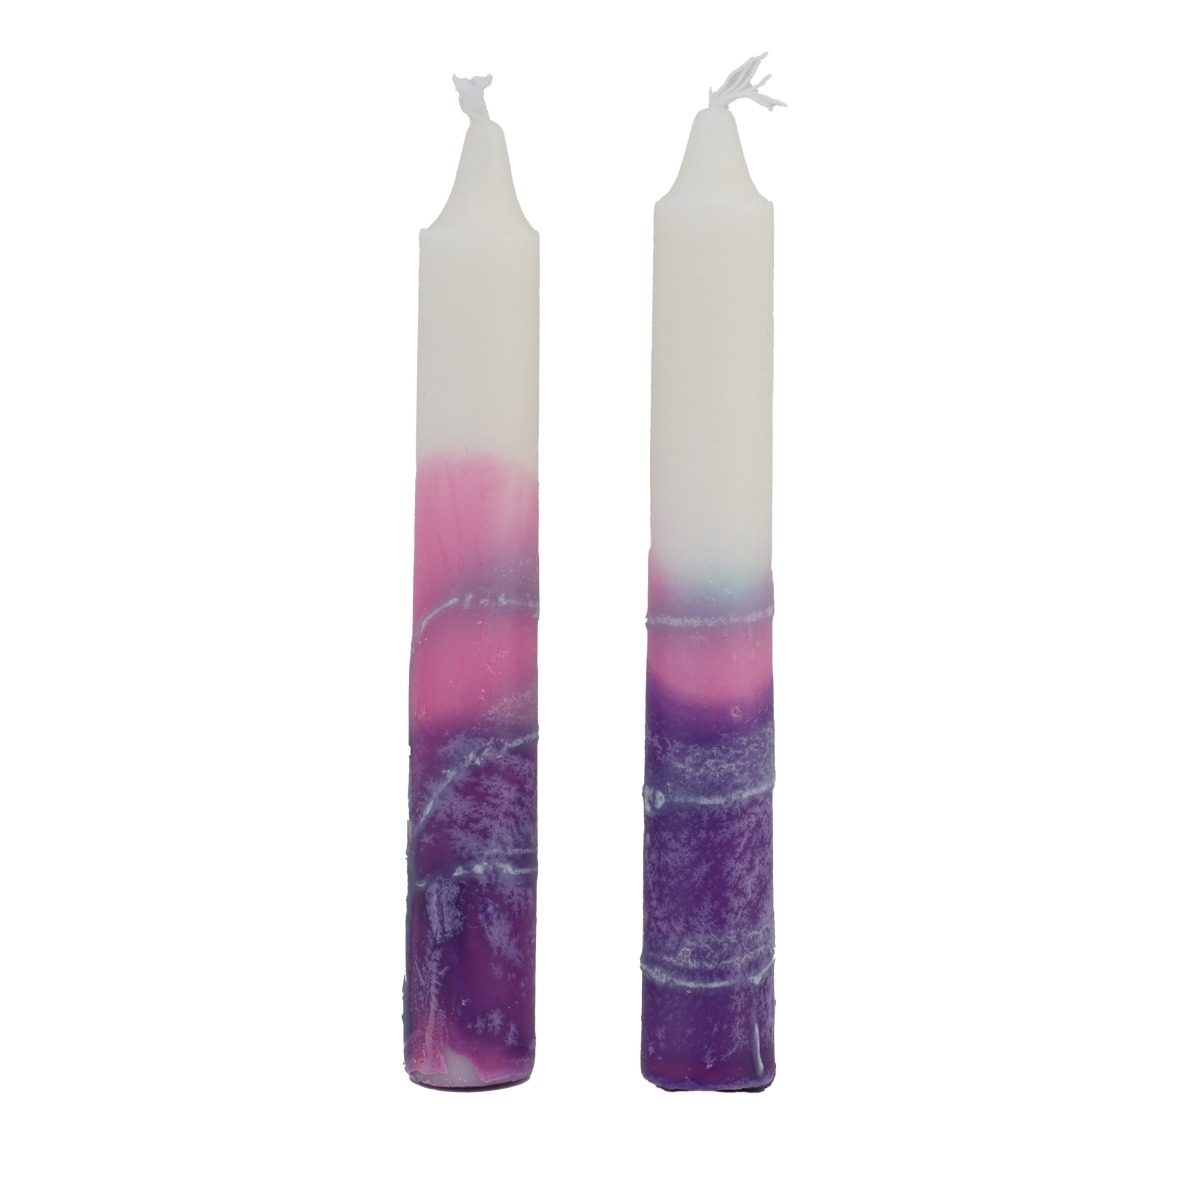 12 Shabbat Candles – Pink and White - 1